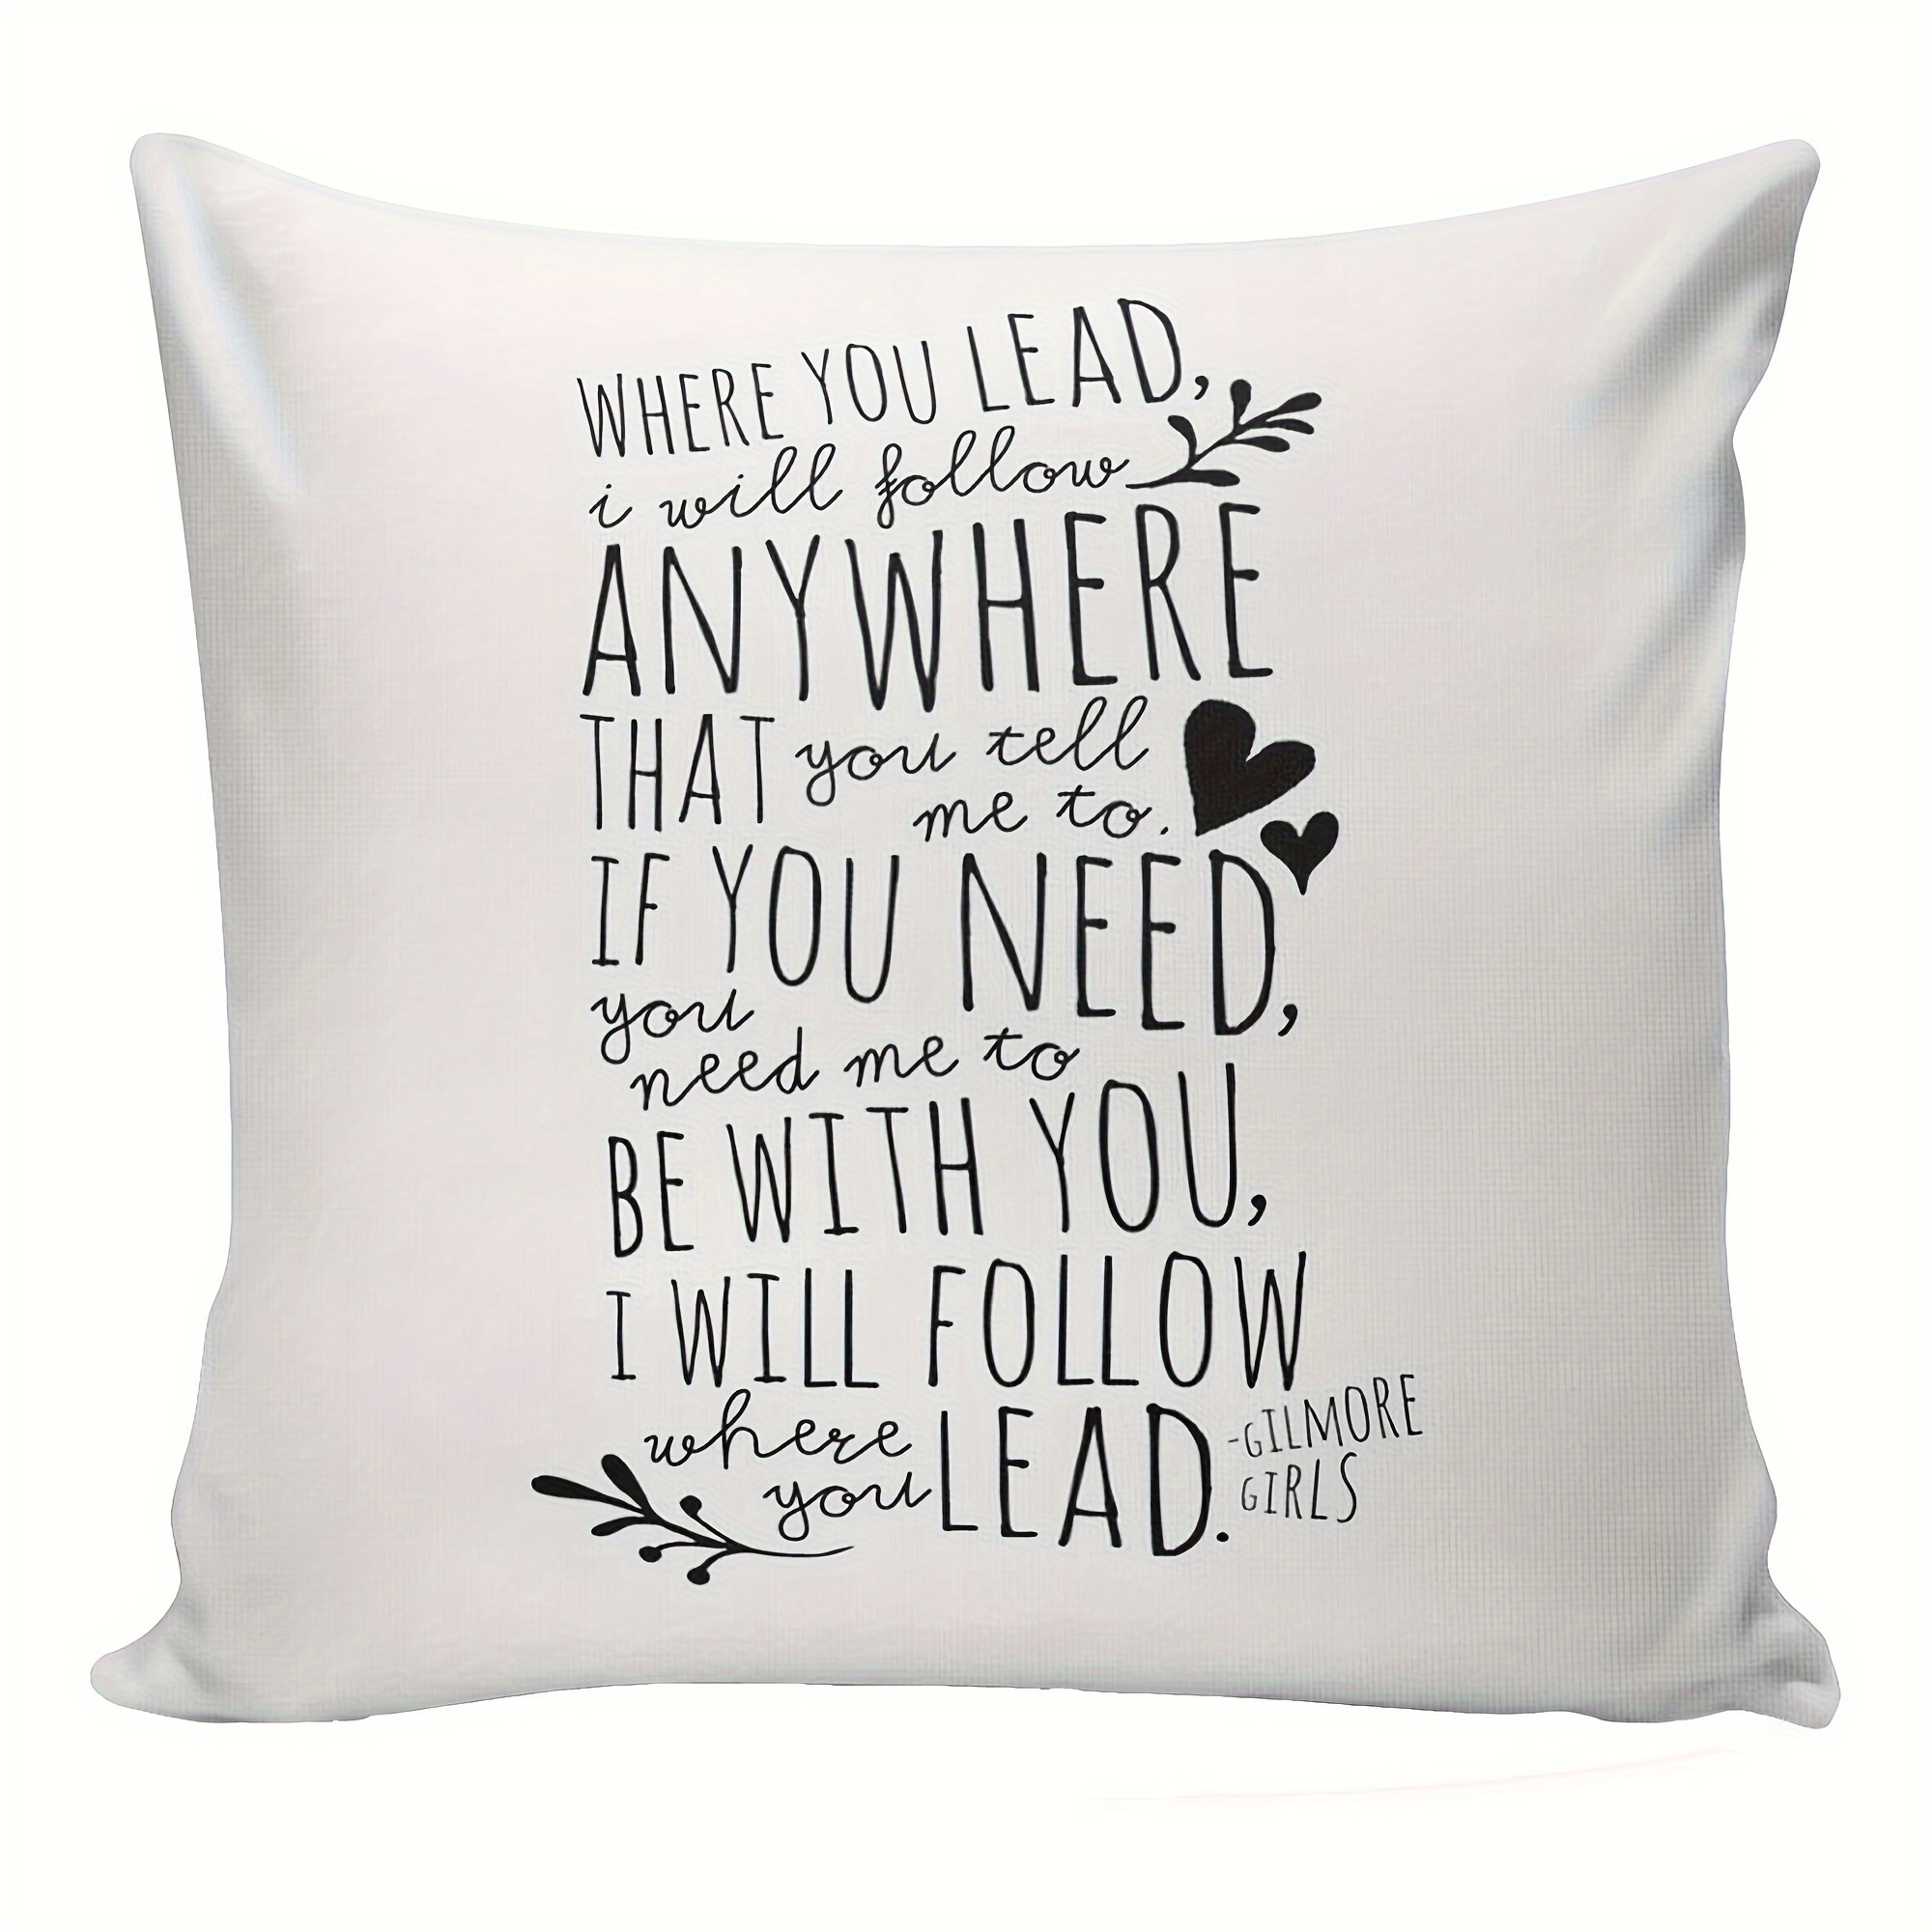 

1pc Home Decor Pillowcase Black And White Gilmore Girls Where You Lead Theme Song Square Throw Pillowshort Plush Decor 18x18 Inch Without Pillow Core